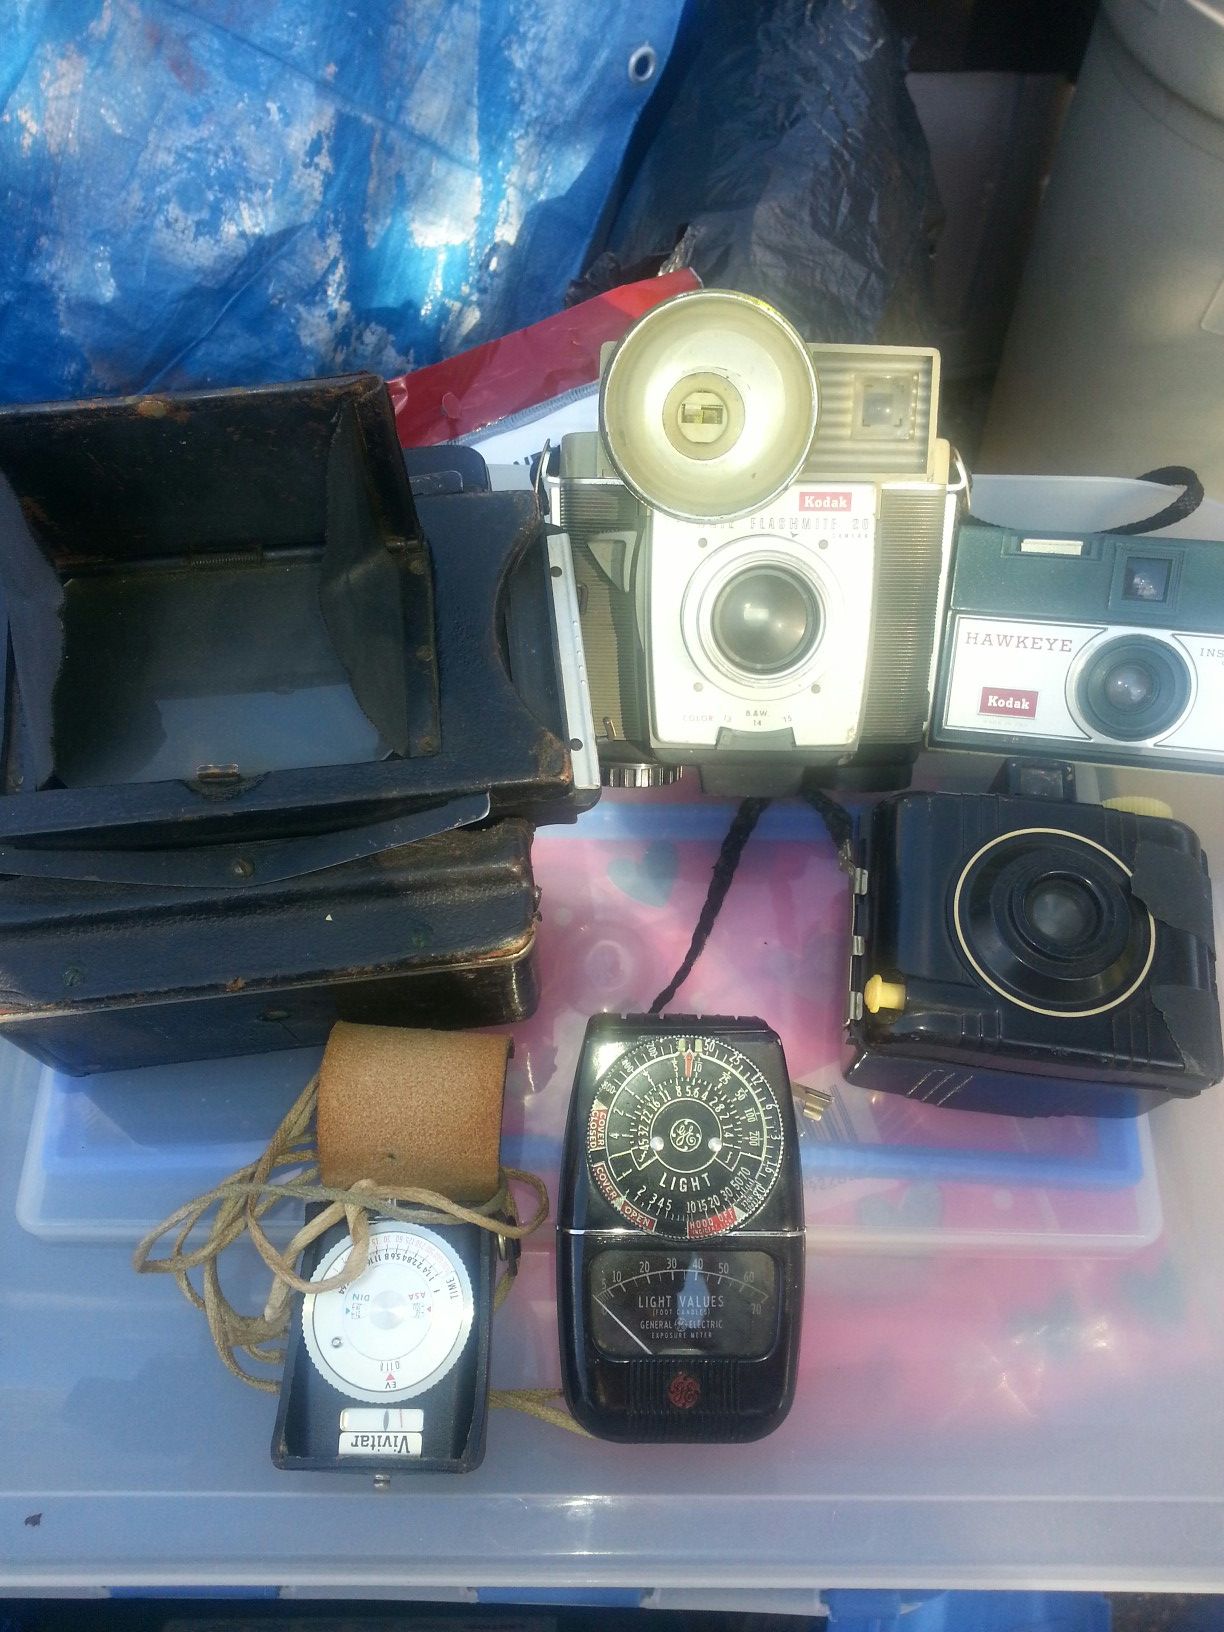 Vintage cameras the lot....Only 40